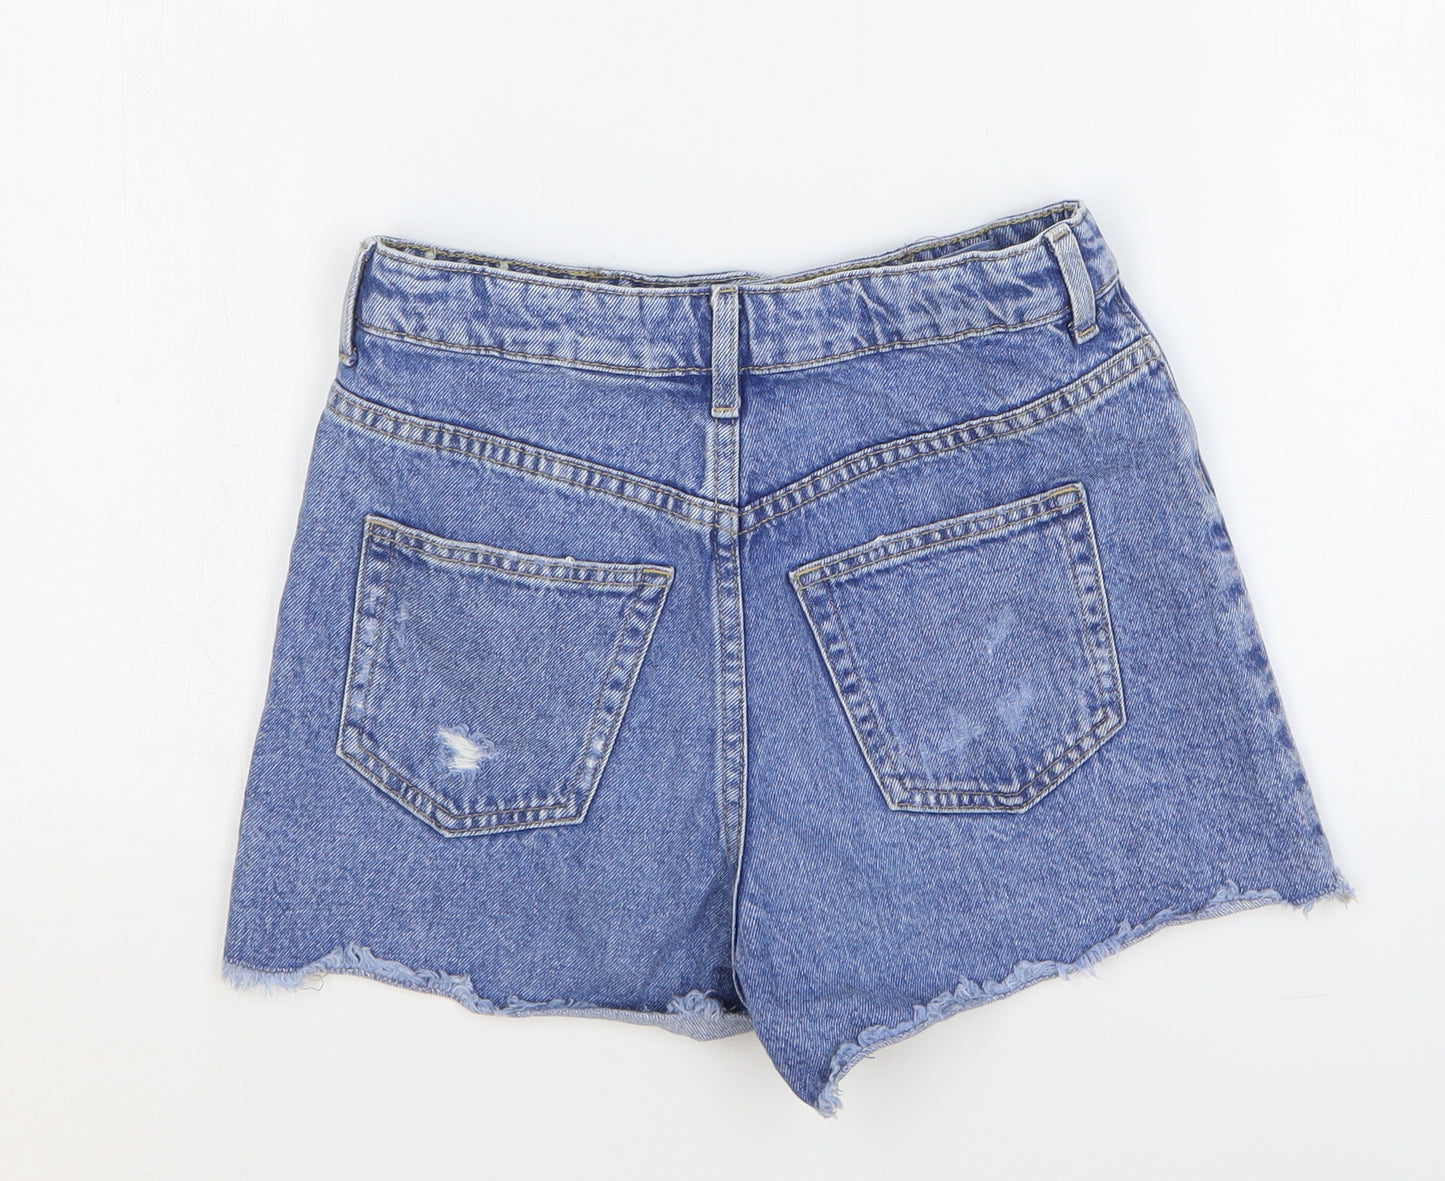 H&M Girls Blue Cotton Cut-Off Shorts Size 11-12 Years Regular Buckle - Distressed